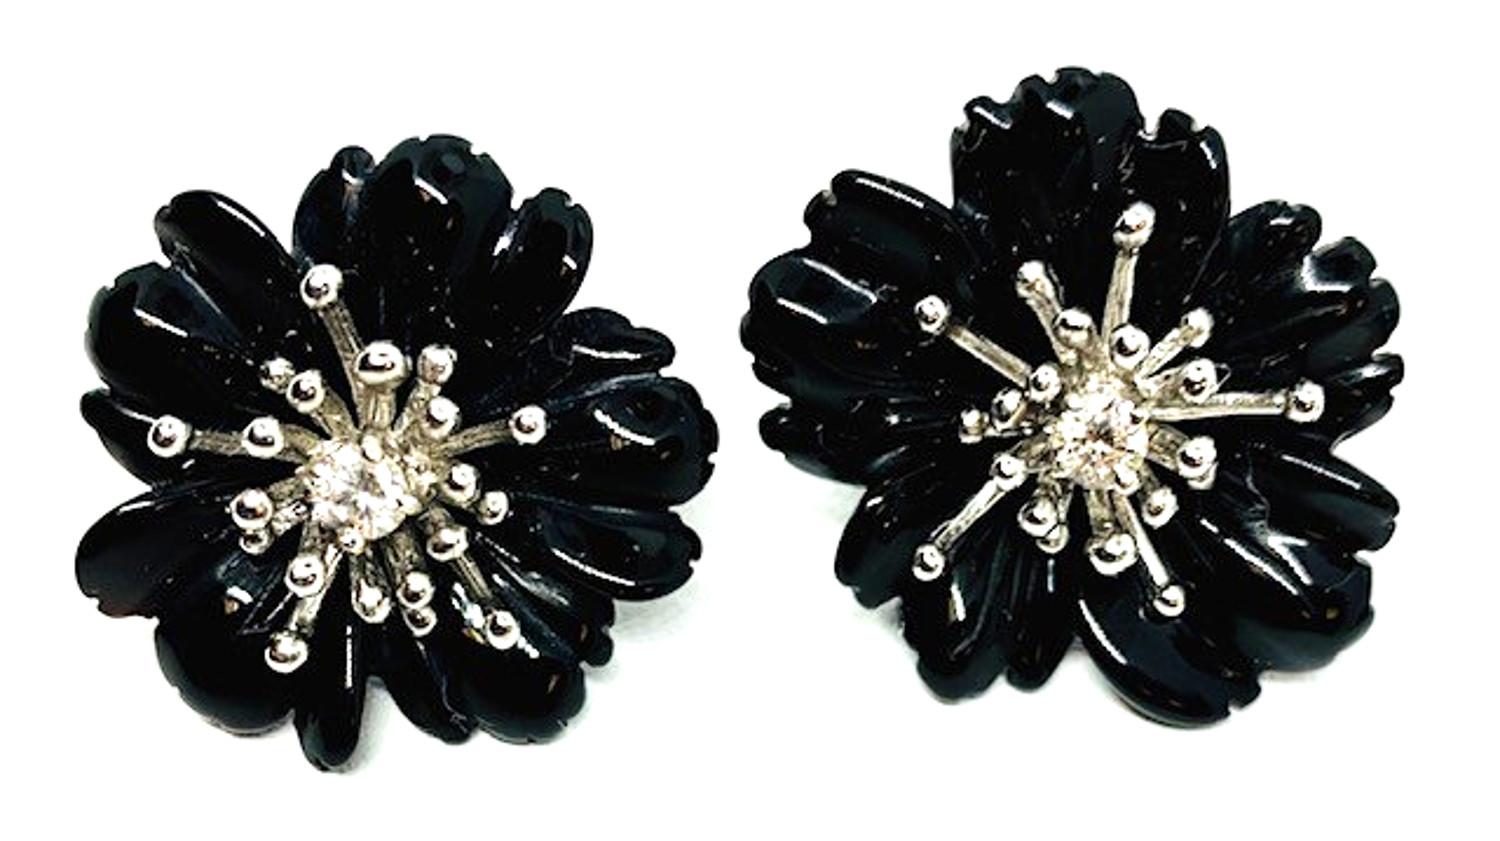  Hand Carved Gemstone Flower Earring Jacket Set with 18k White Gold and Diamonds 2